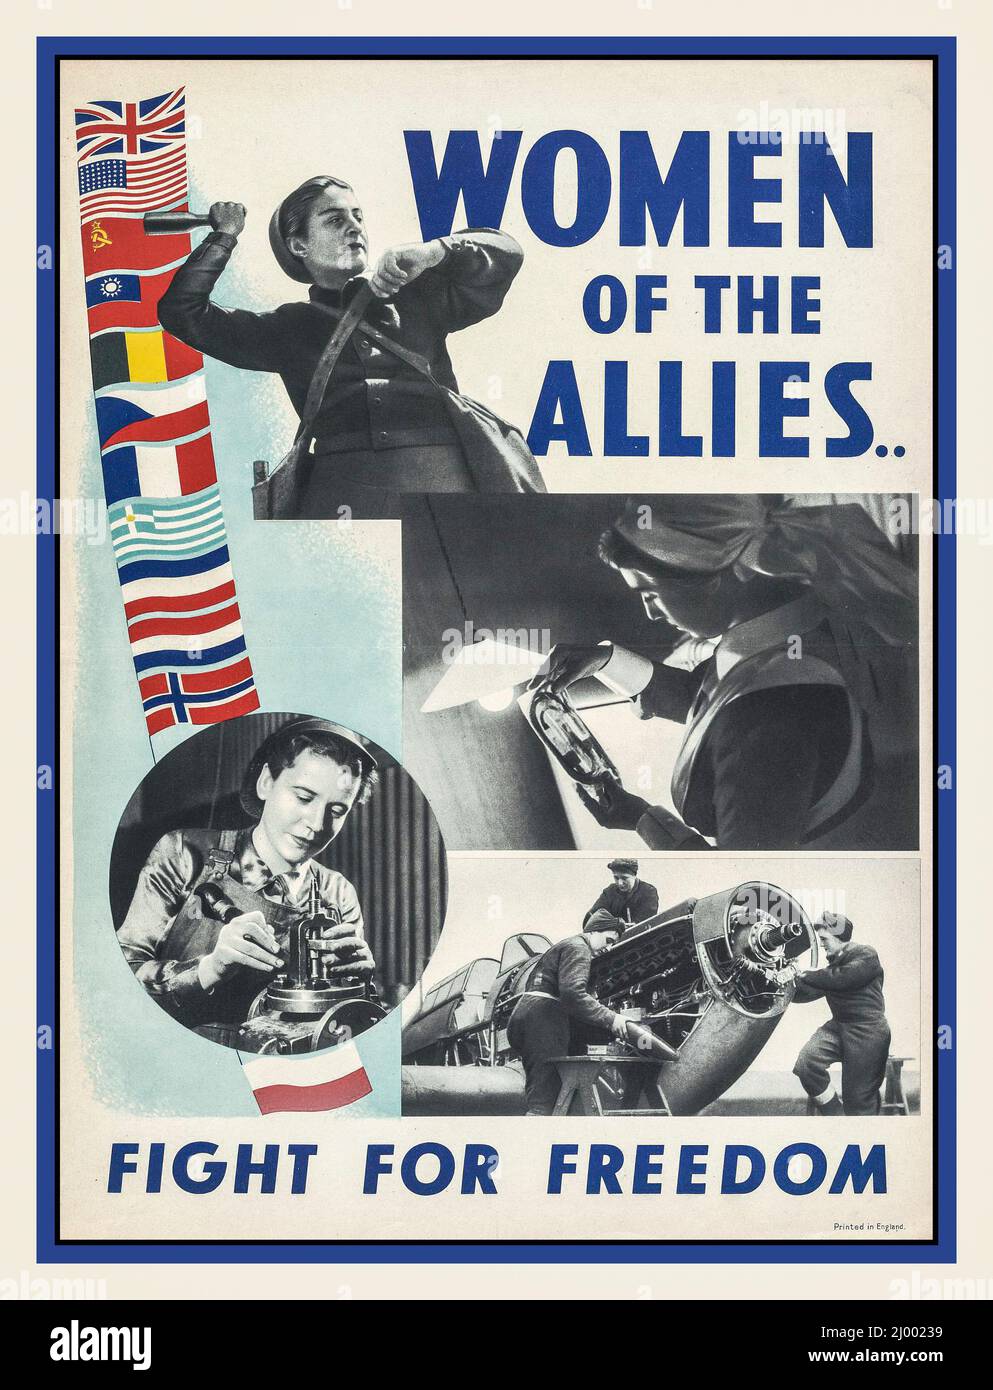 Vintage WW2 Recruitment Recruiting Poster Women in war work. The War Effort at home in the UK 'Women of the Allies Fight for Freedom', United Kingdom, 1943 Stock Photo